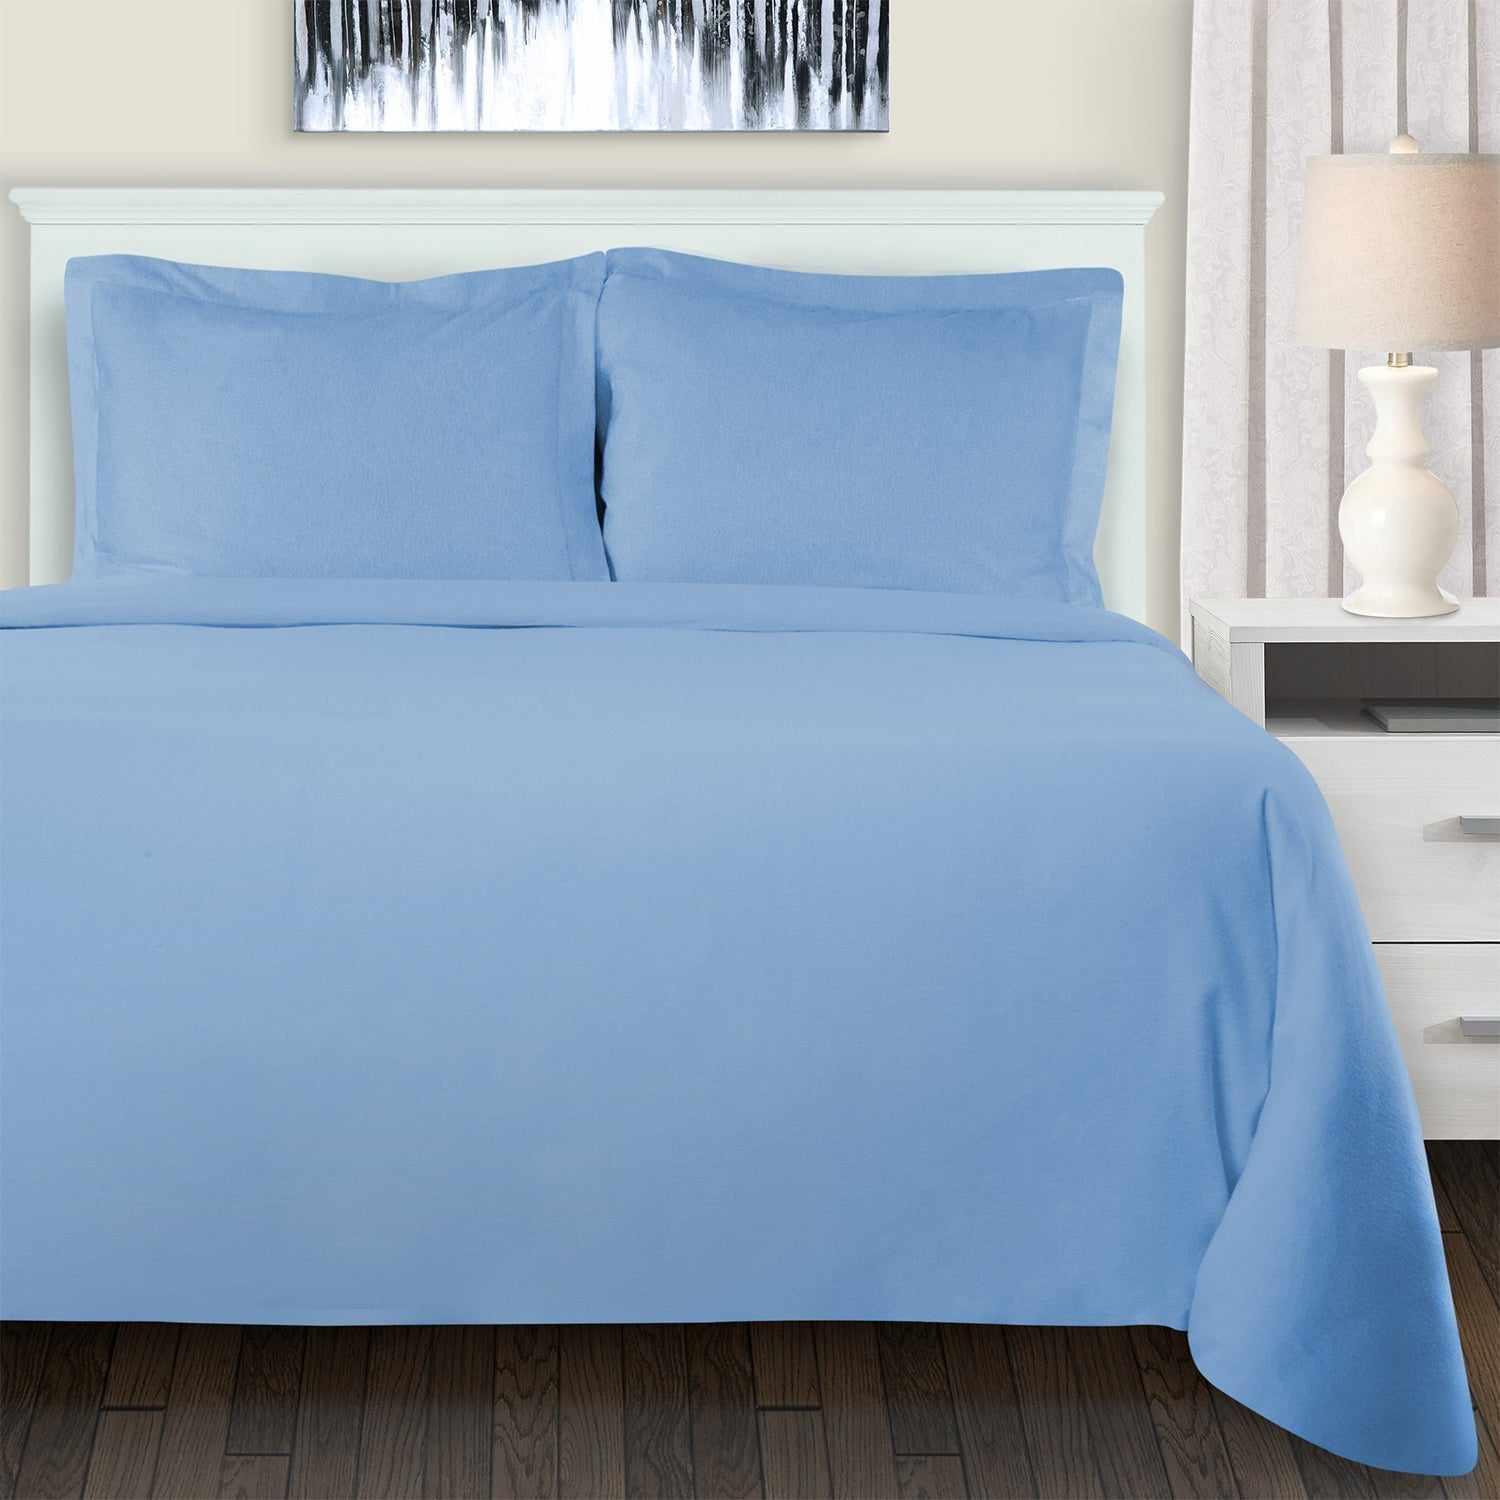 Superior Cotton Flannel Solid or Trellis Heavyweight and Breathable Duvet Cover Set with Button Closure - Light Blue